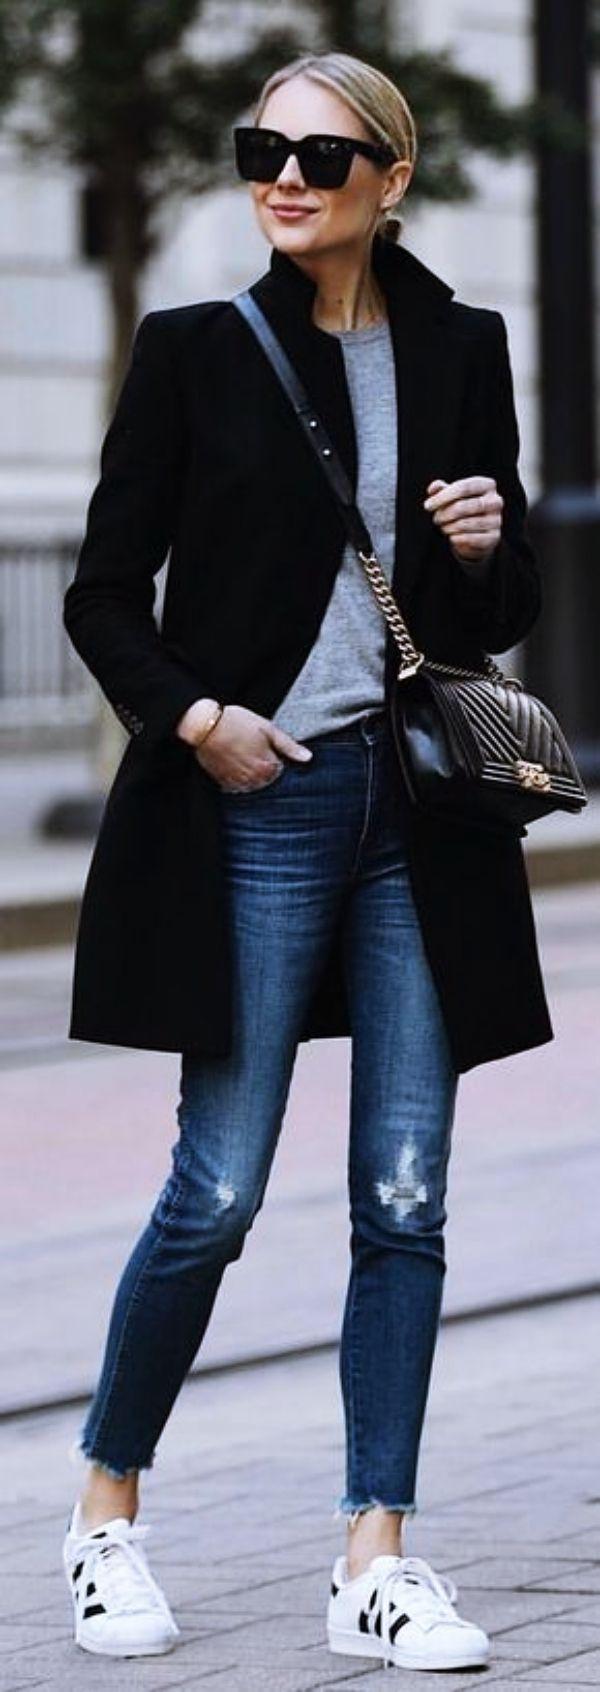 Black Coat Outfit. Casual outfits Trench coat, Casual wear: Wool Coat  